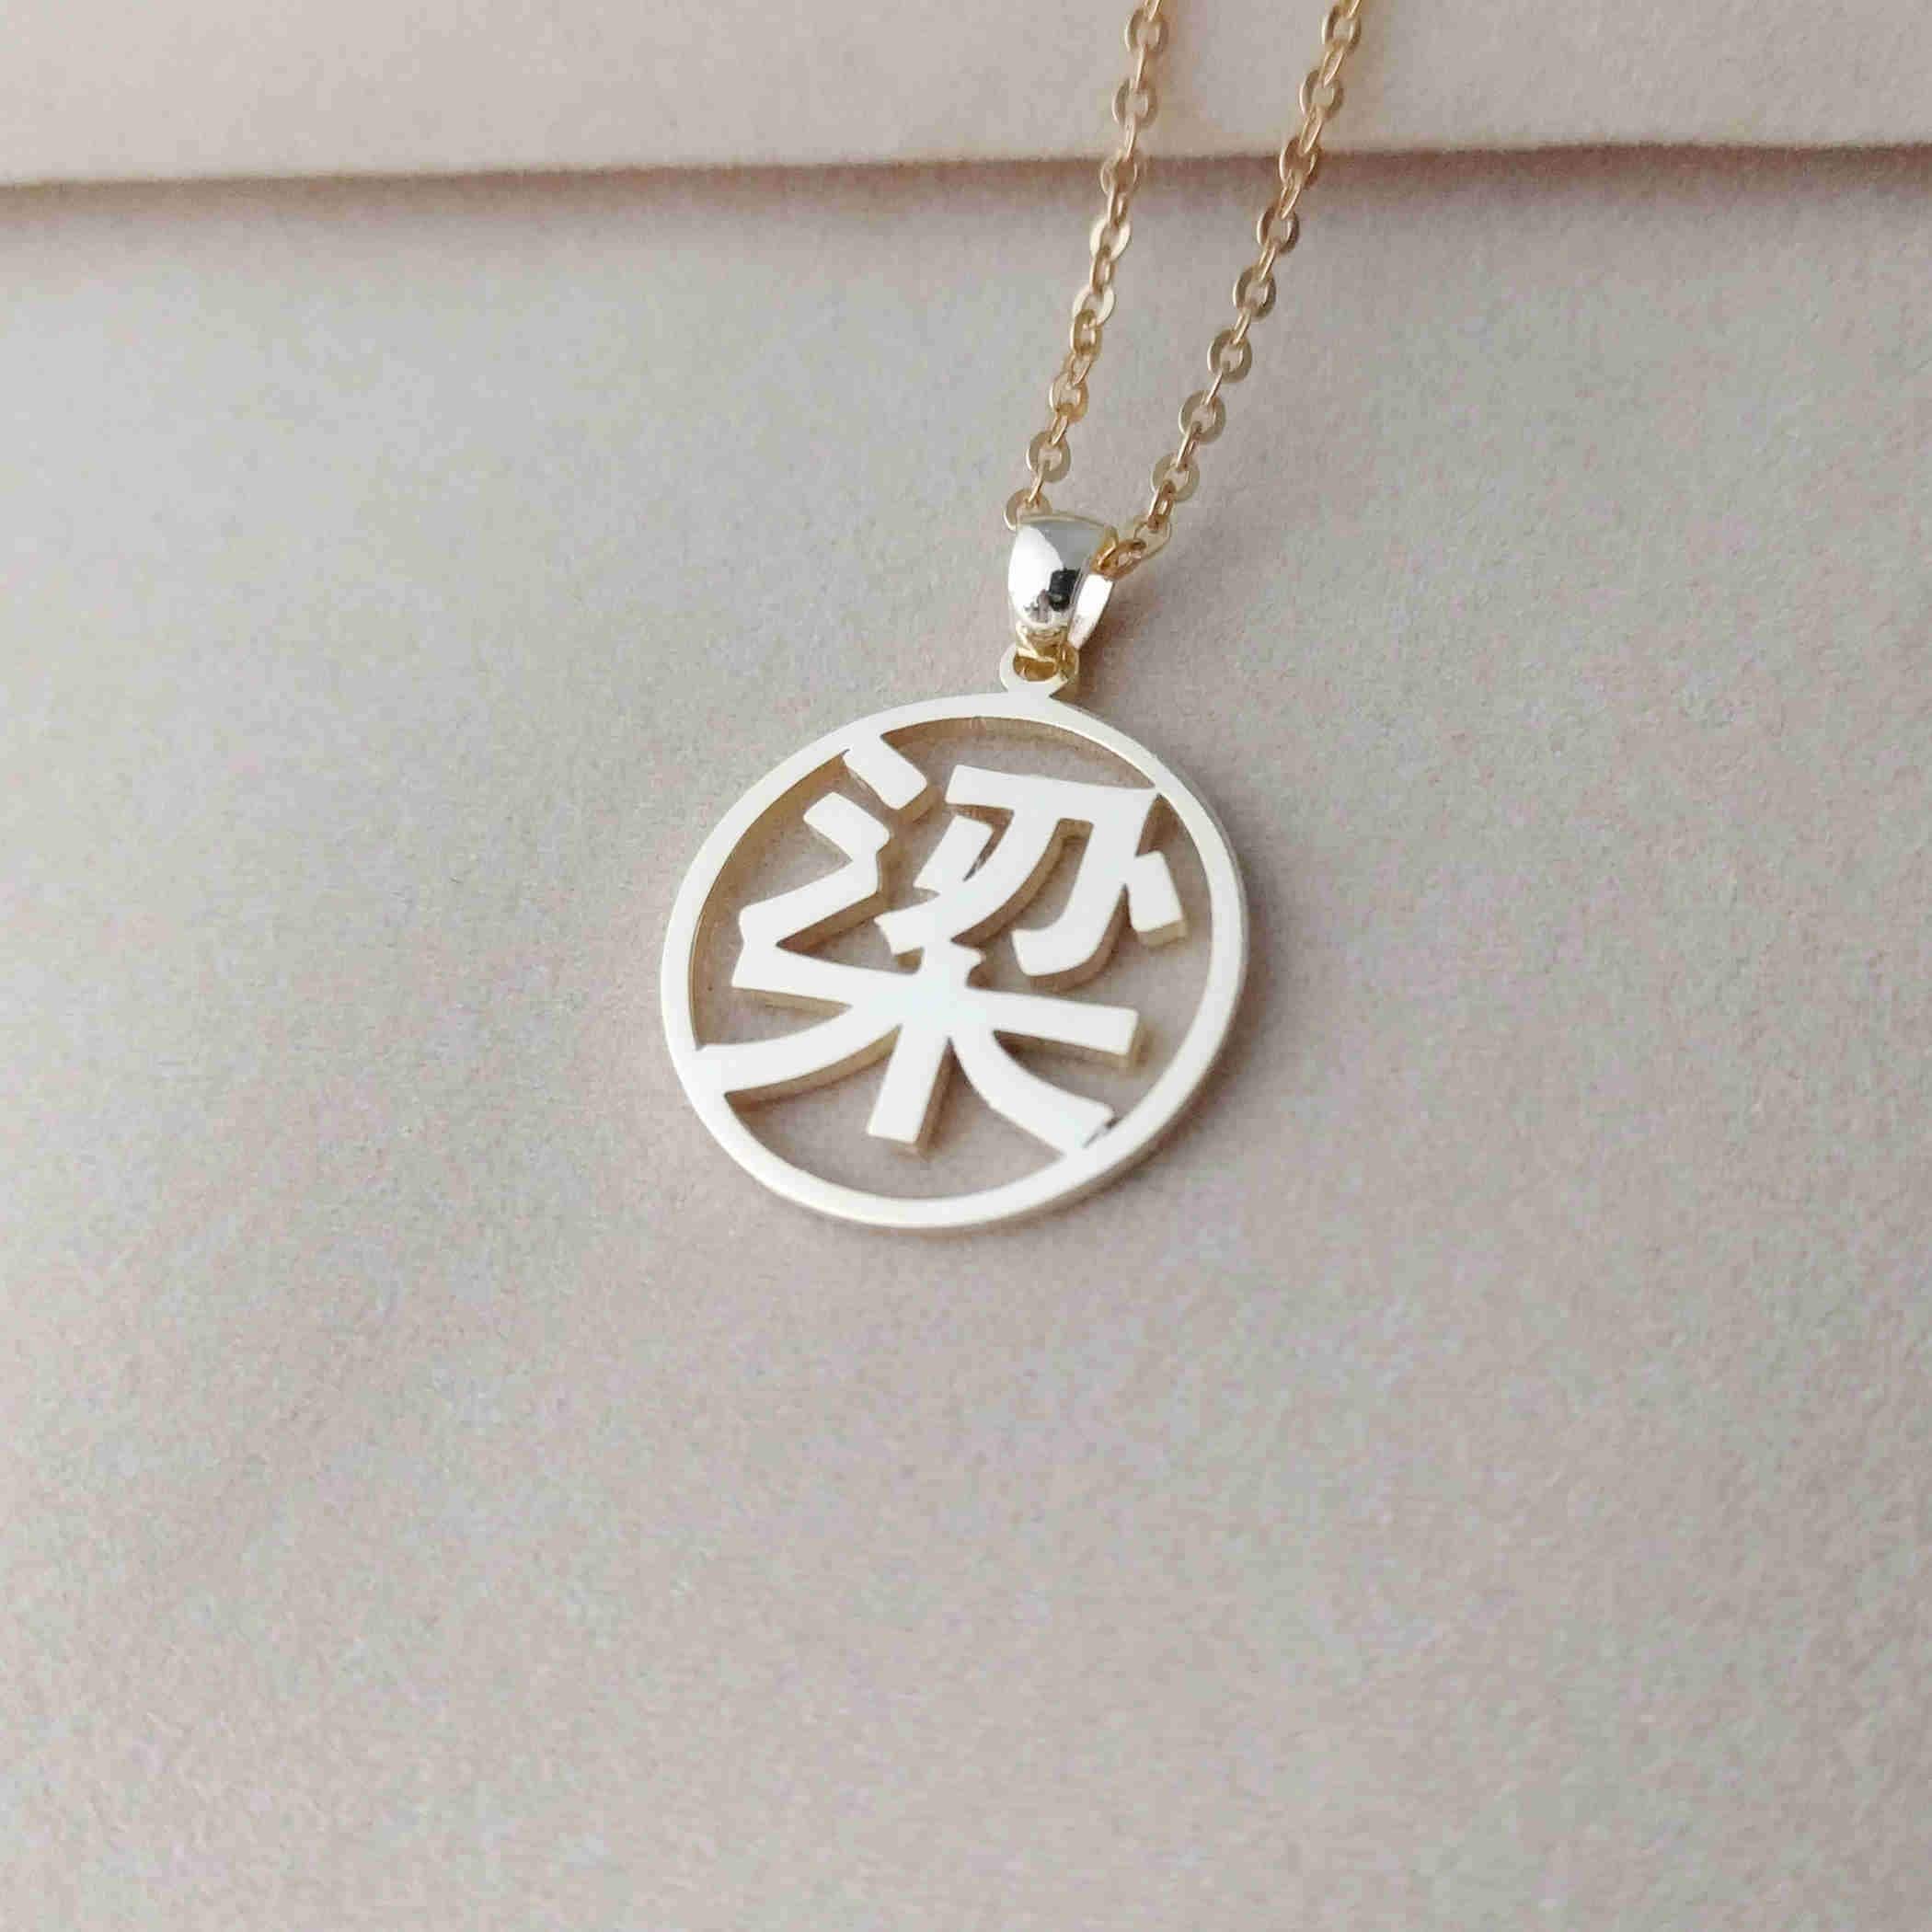 Buy Chinese Love Necklace, Silver Love Symbol Necklace, Chinese Mandarin  Love Necklace, Japanese Affection Necklace, Love in Mandarin Necklace  Online in India - Etsy